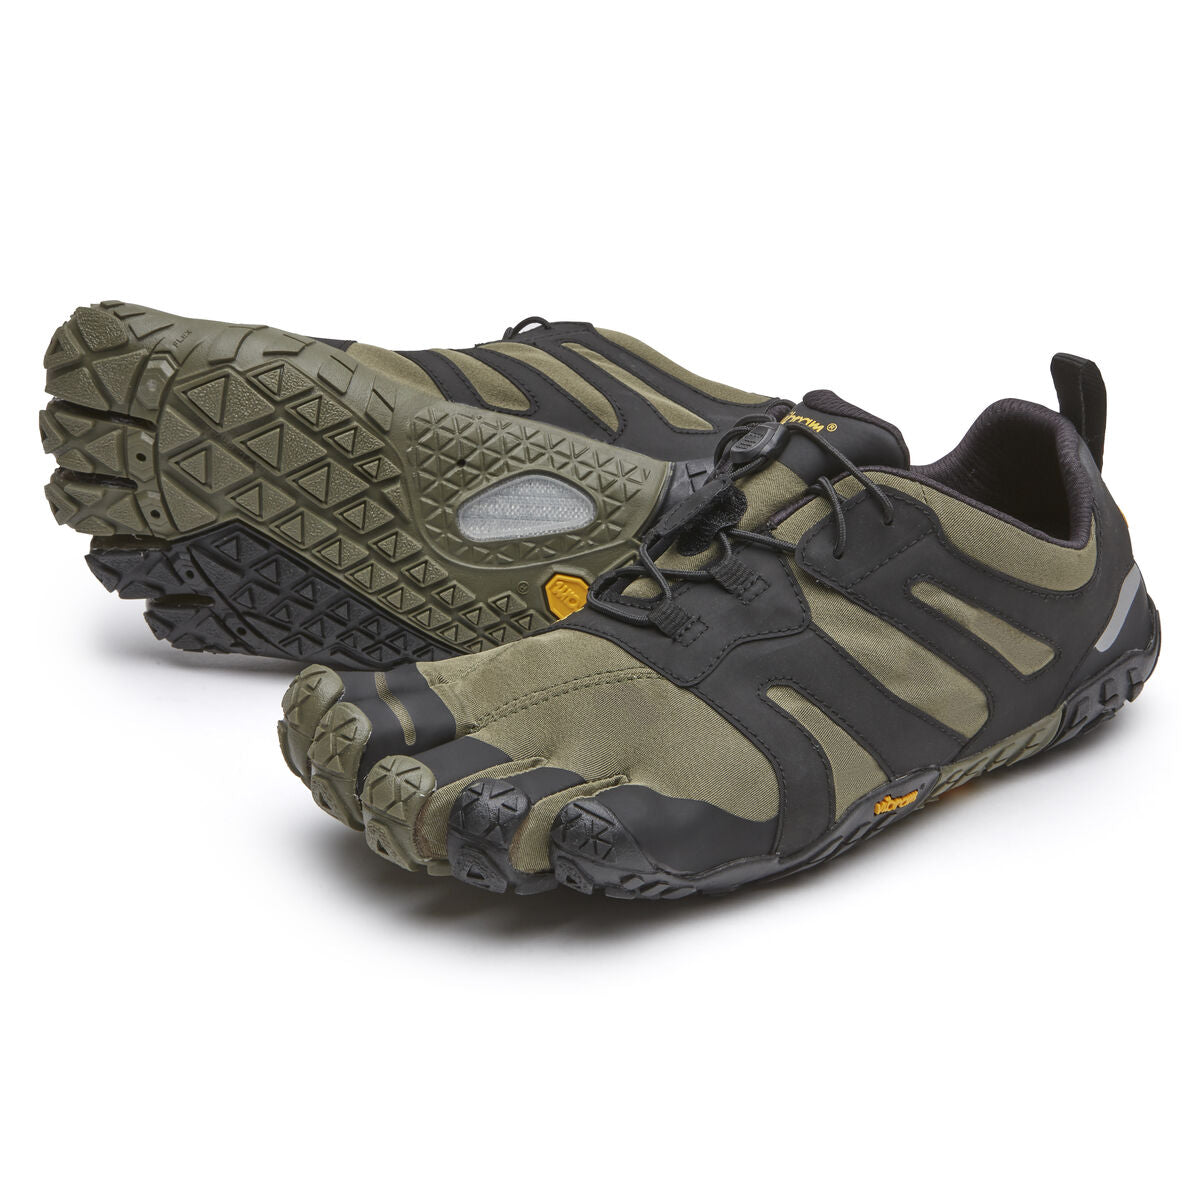 Women's Vibram Five Fingers V-Trail 2.0 Running Shoe in Ivy/Black from the front